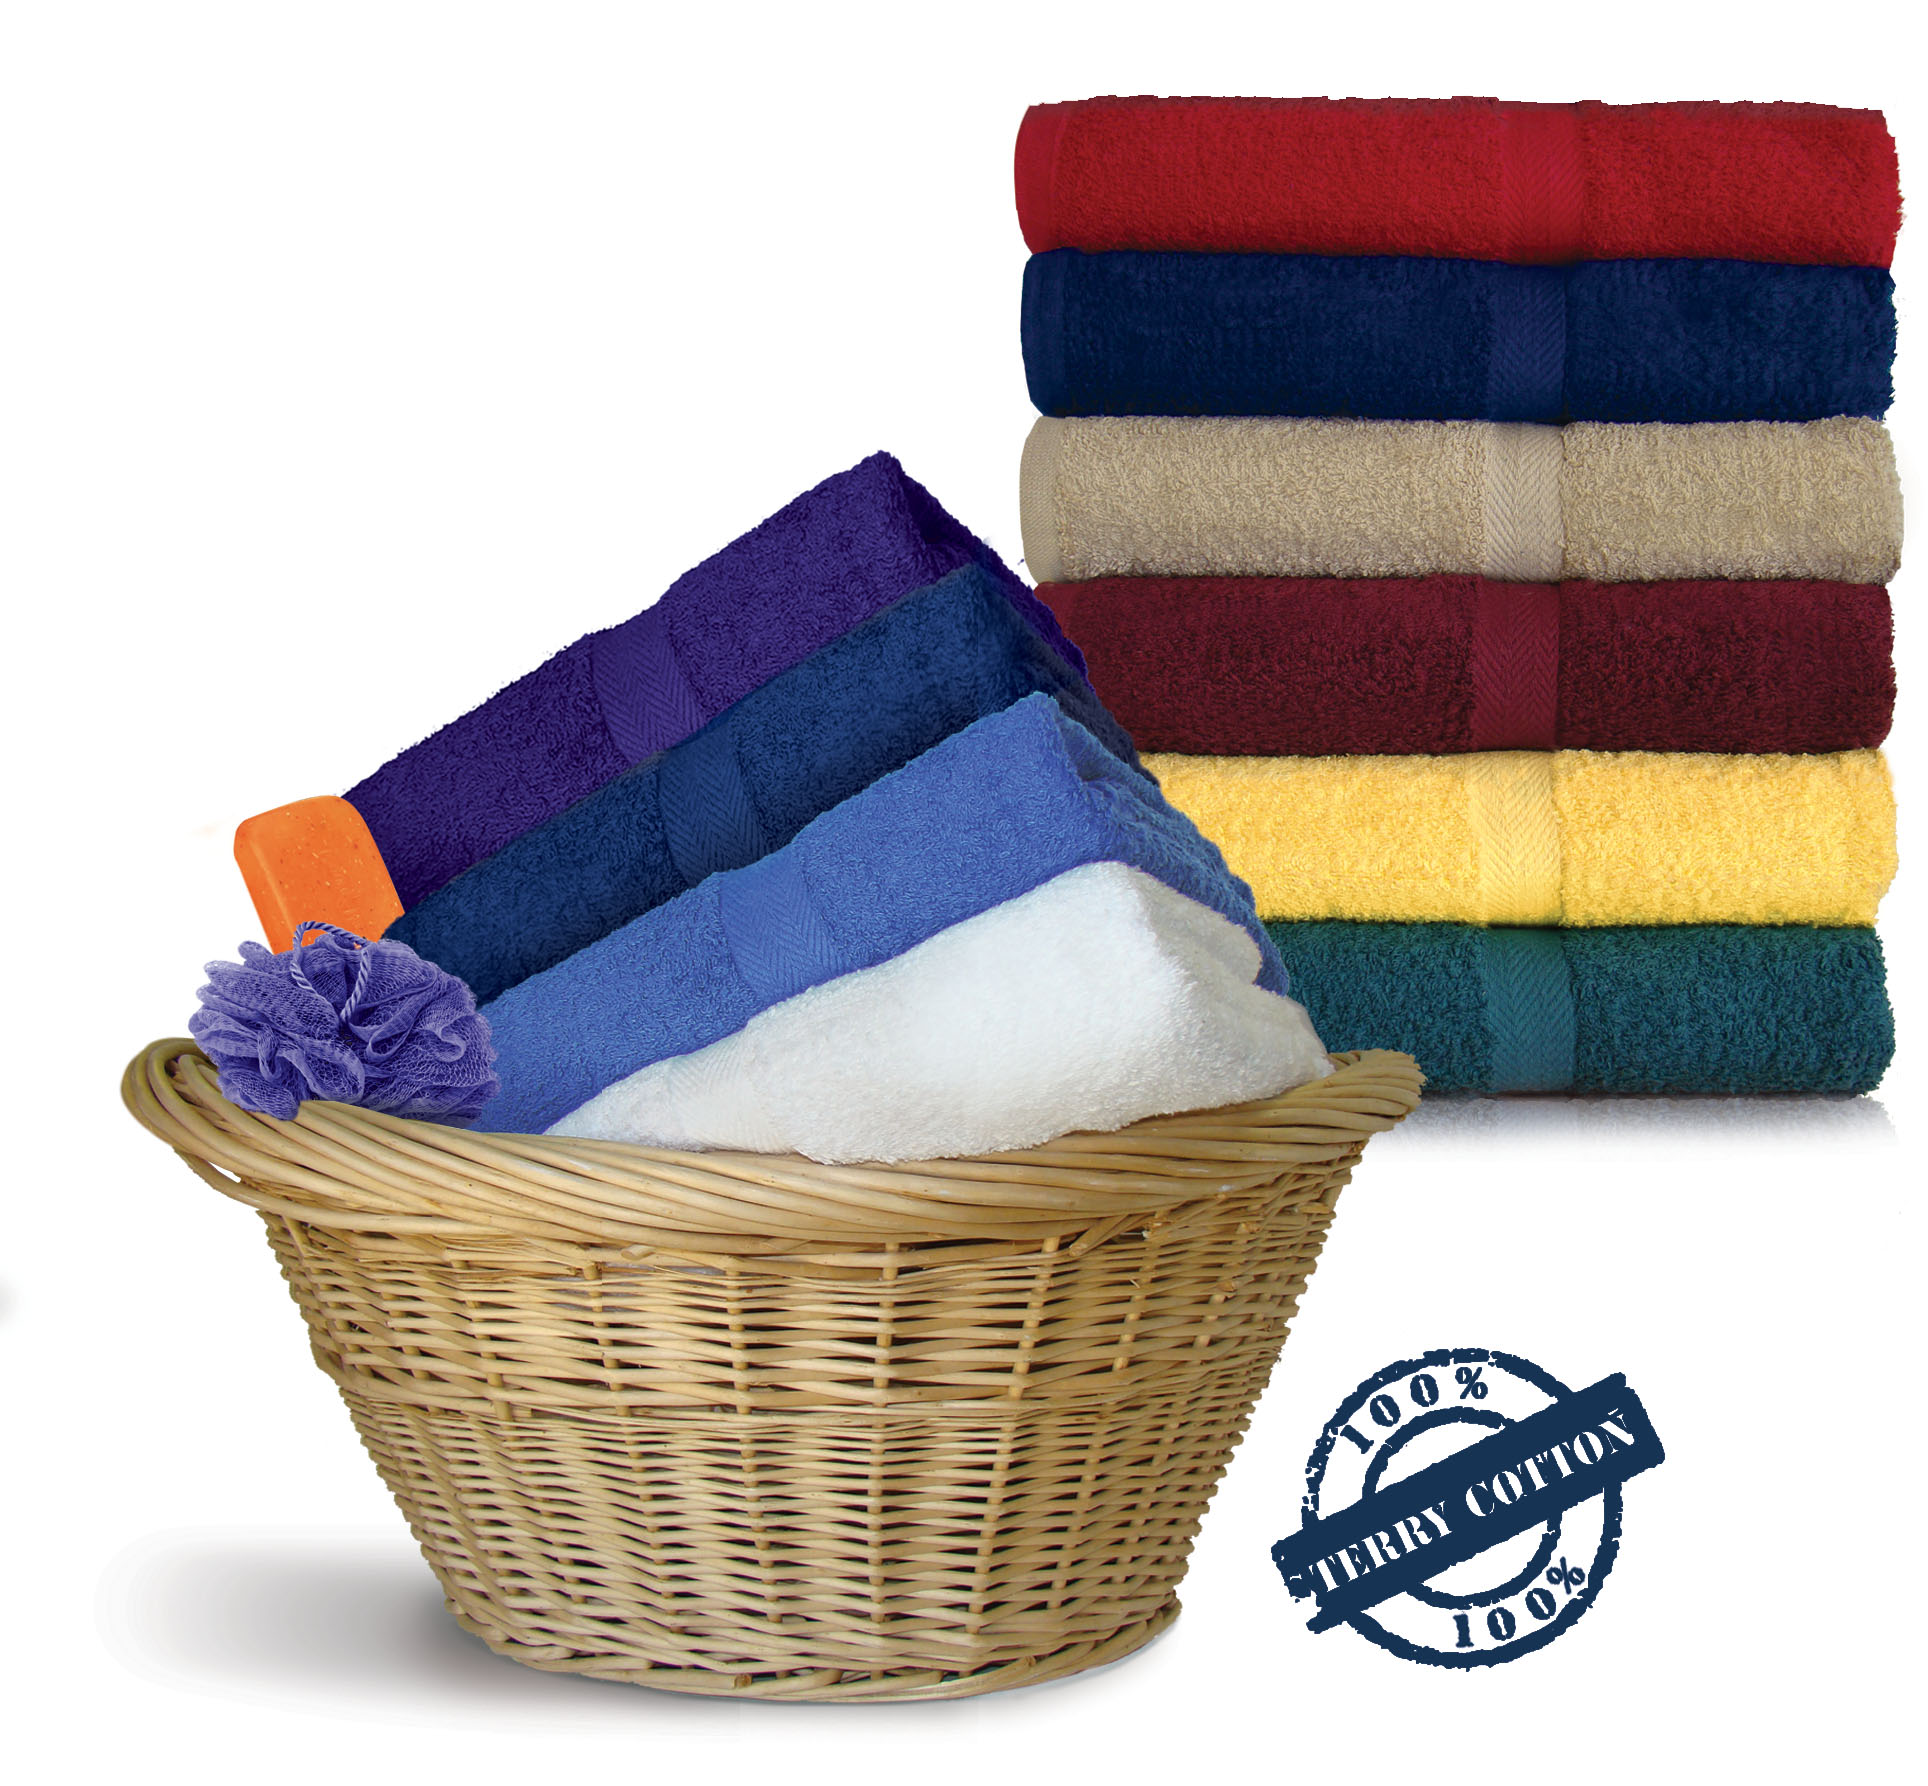 EMBROIDERED 30x52 Shuttleless Loom Bath Towels by Royal Comfort, 14.0 Lbs per dz, Combed Cotton.